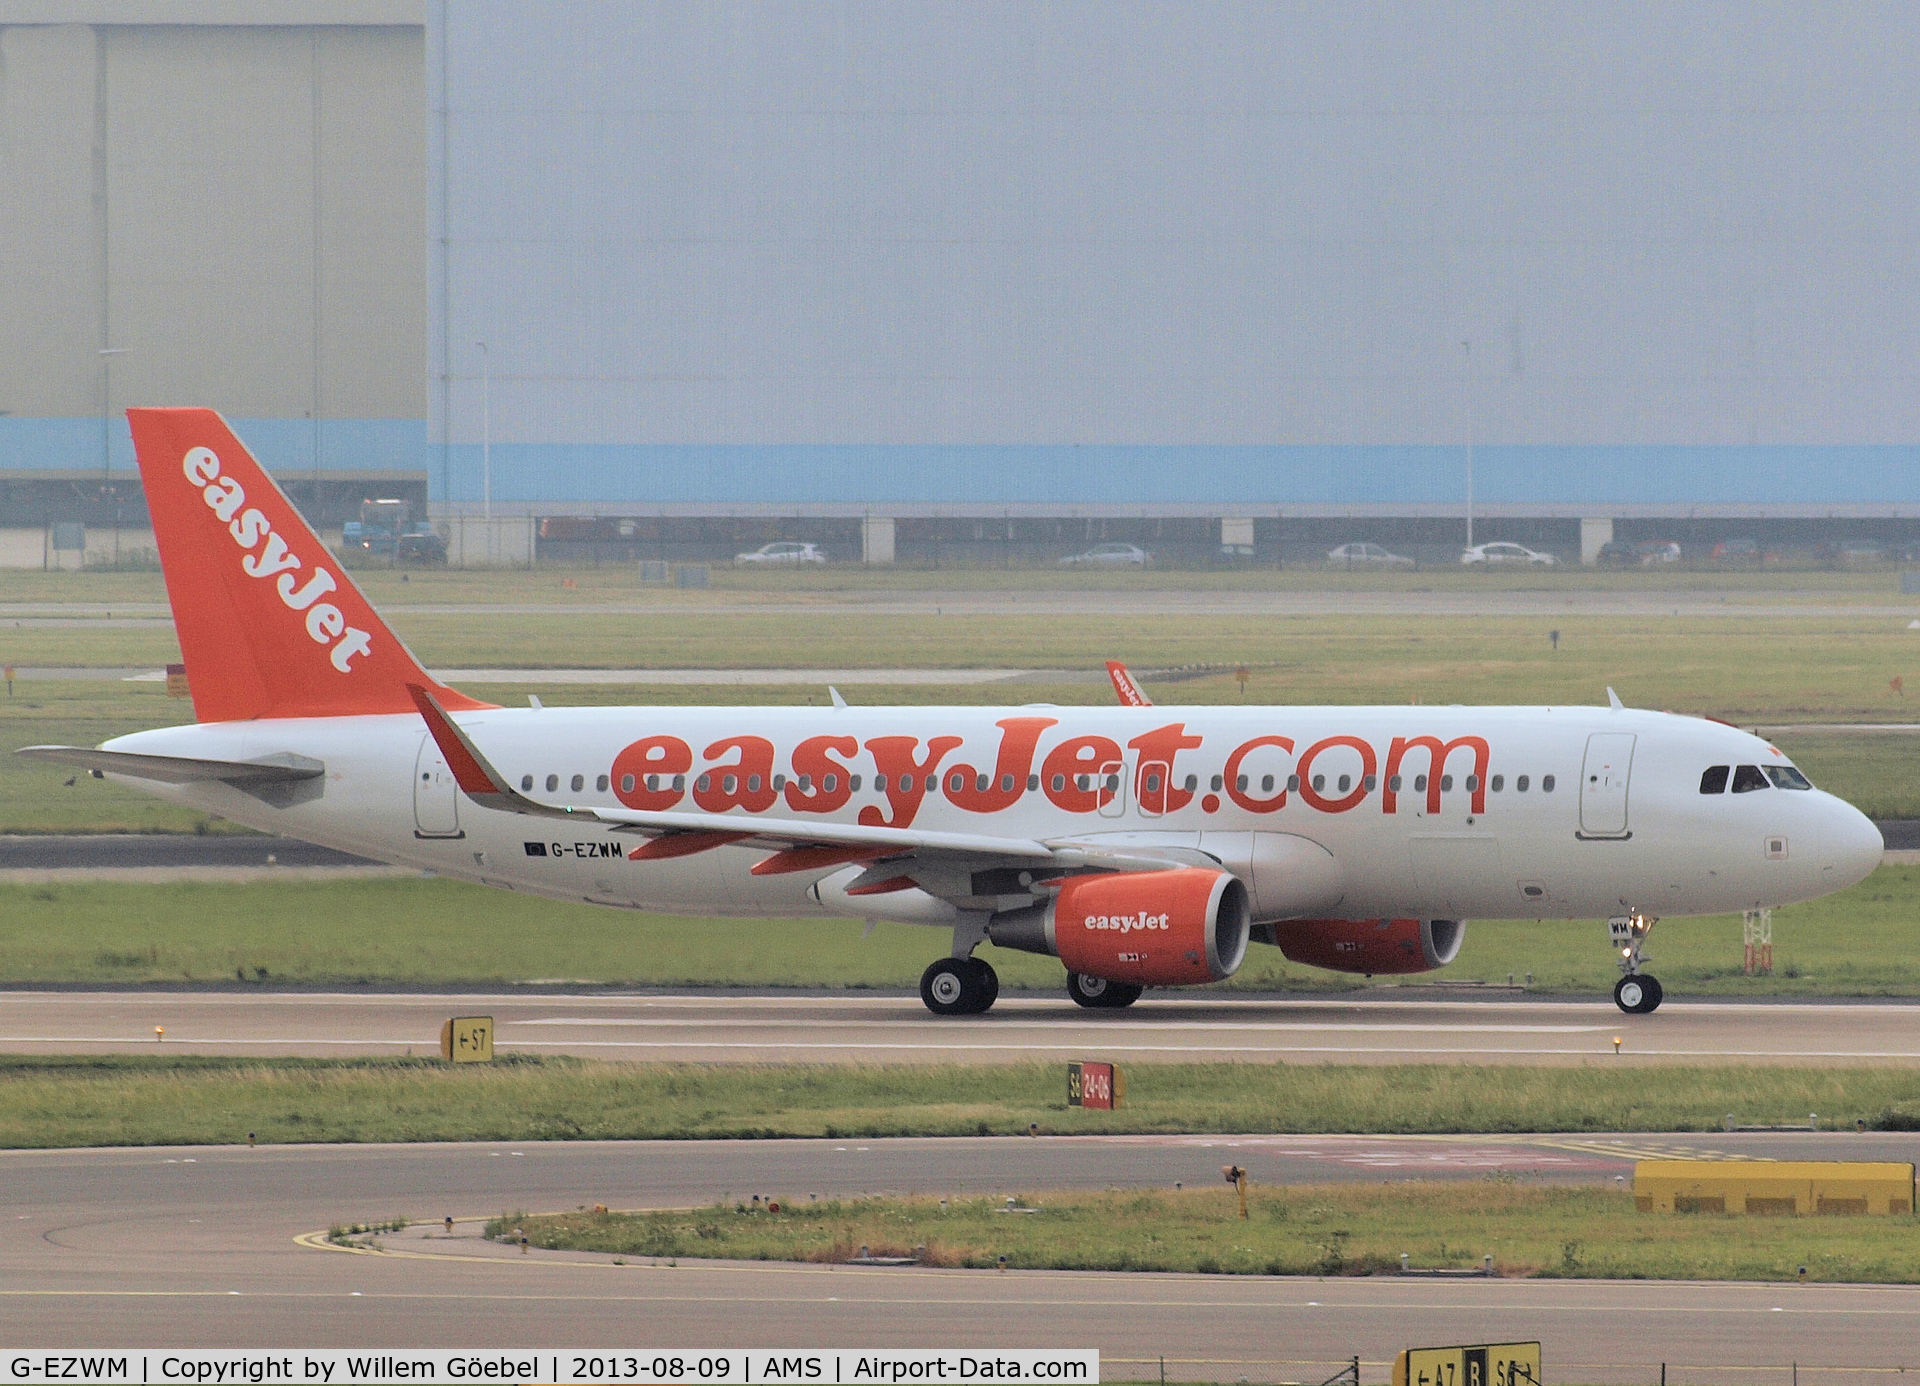 G-EZWM, 2013 Airbus A320-214 C/N 5739, Taxi to runway 27 of Schiphol Airport